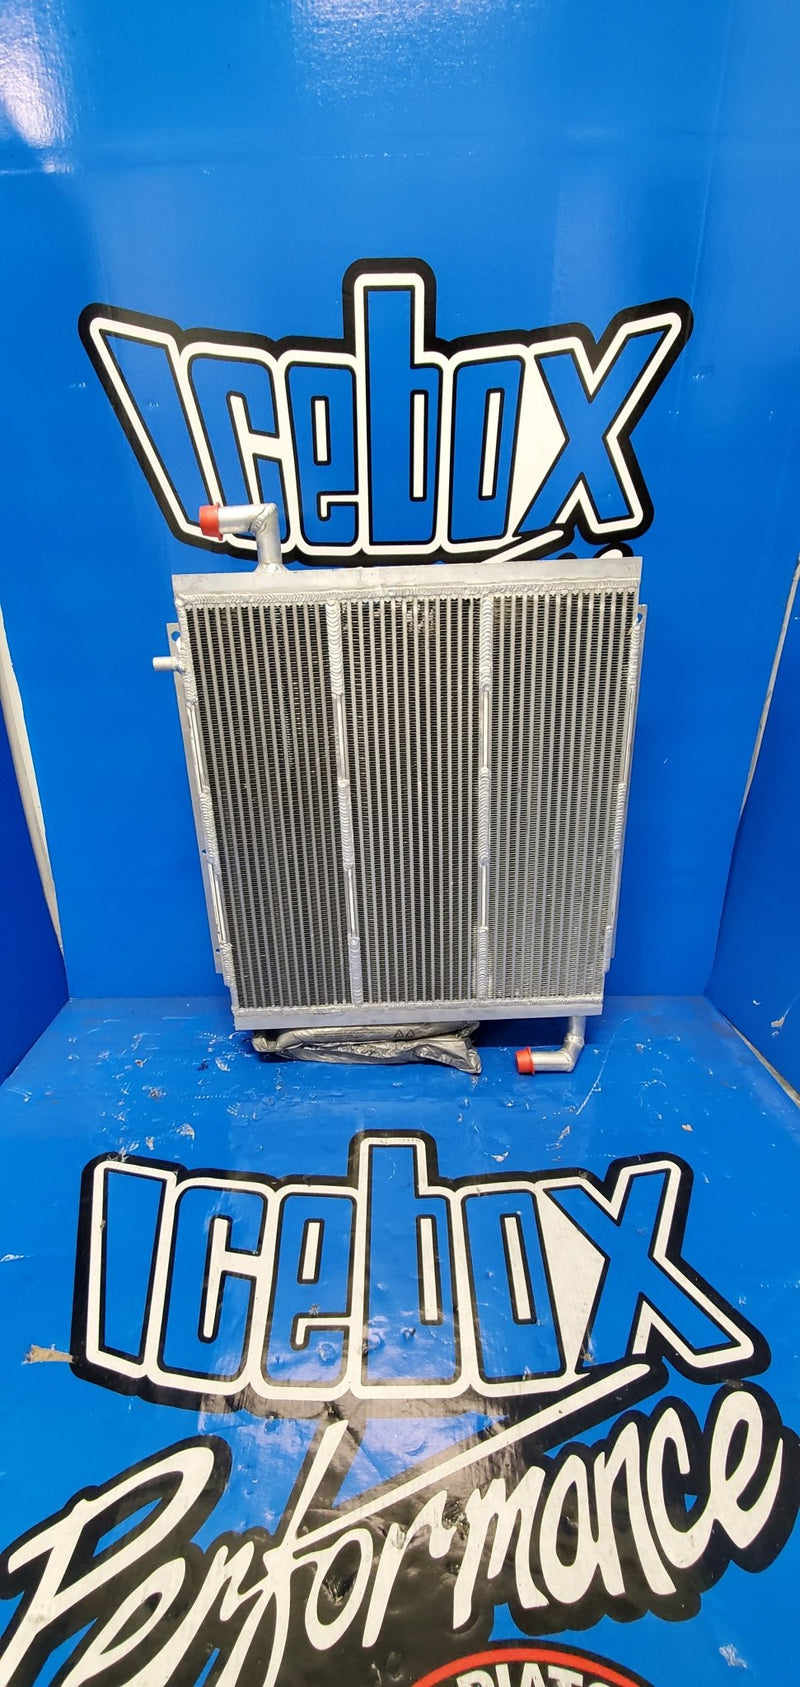 Load image into Gallery viewer, Kobelco SK130, 100, 115, 120 Oil Cooler # 927540 - Radiator Supply House
